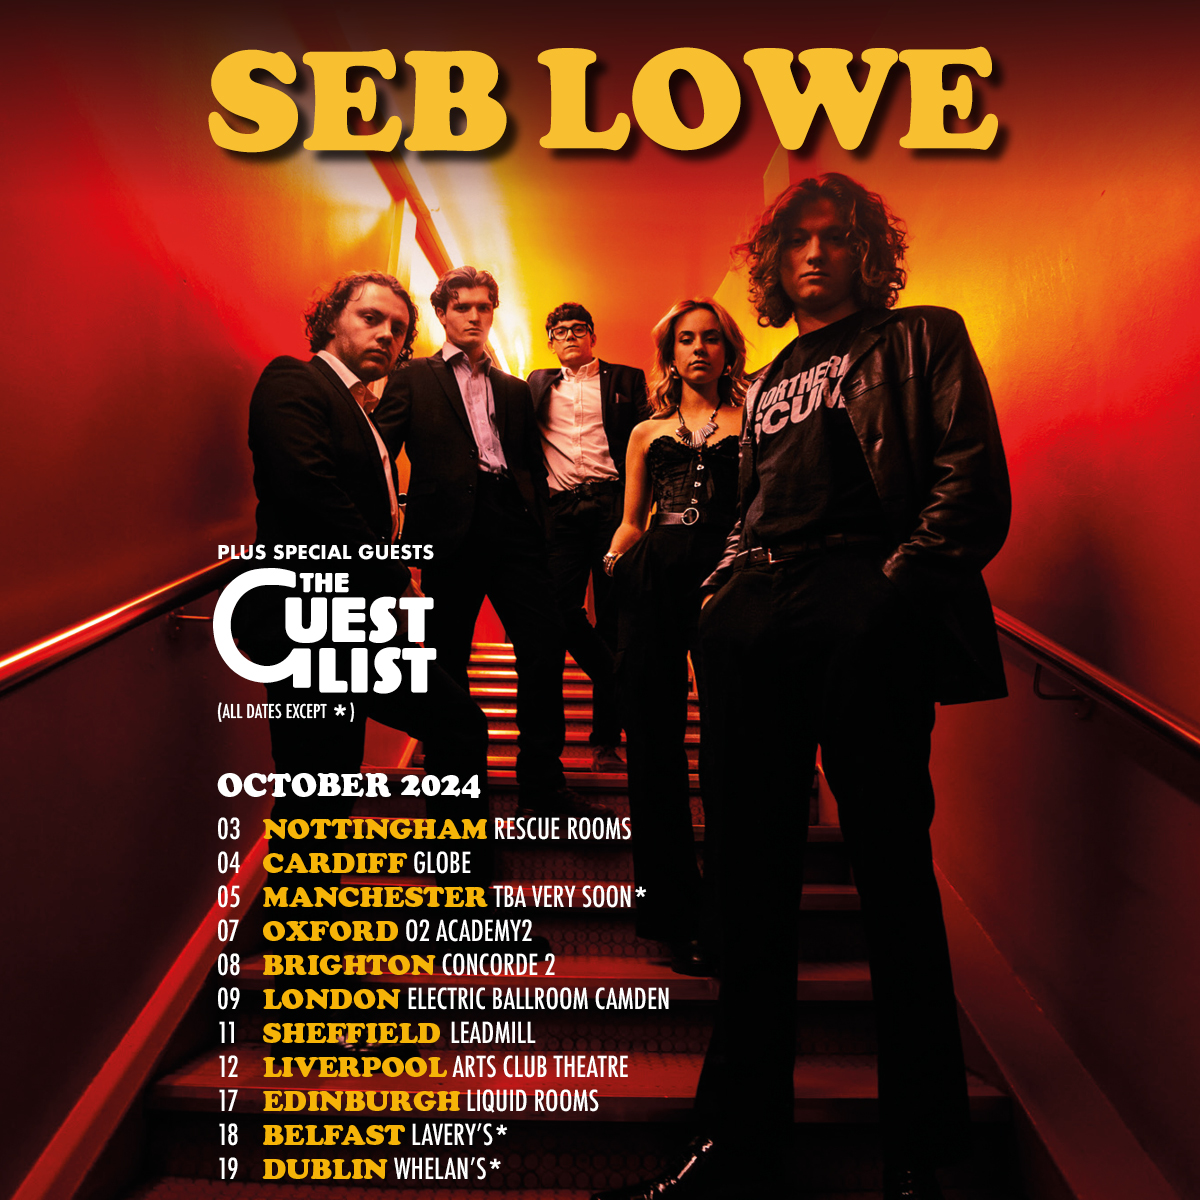 Following his recent sellout tour, @seb_lowe_music and his band head back out on the road, stopping off in Oxford - Monday 07 October. Priority Tickets available 10am Wednesday 08 May at #O2Priority - amg-venues.com/eXZV50Ryza5